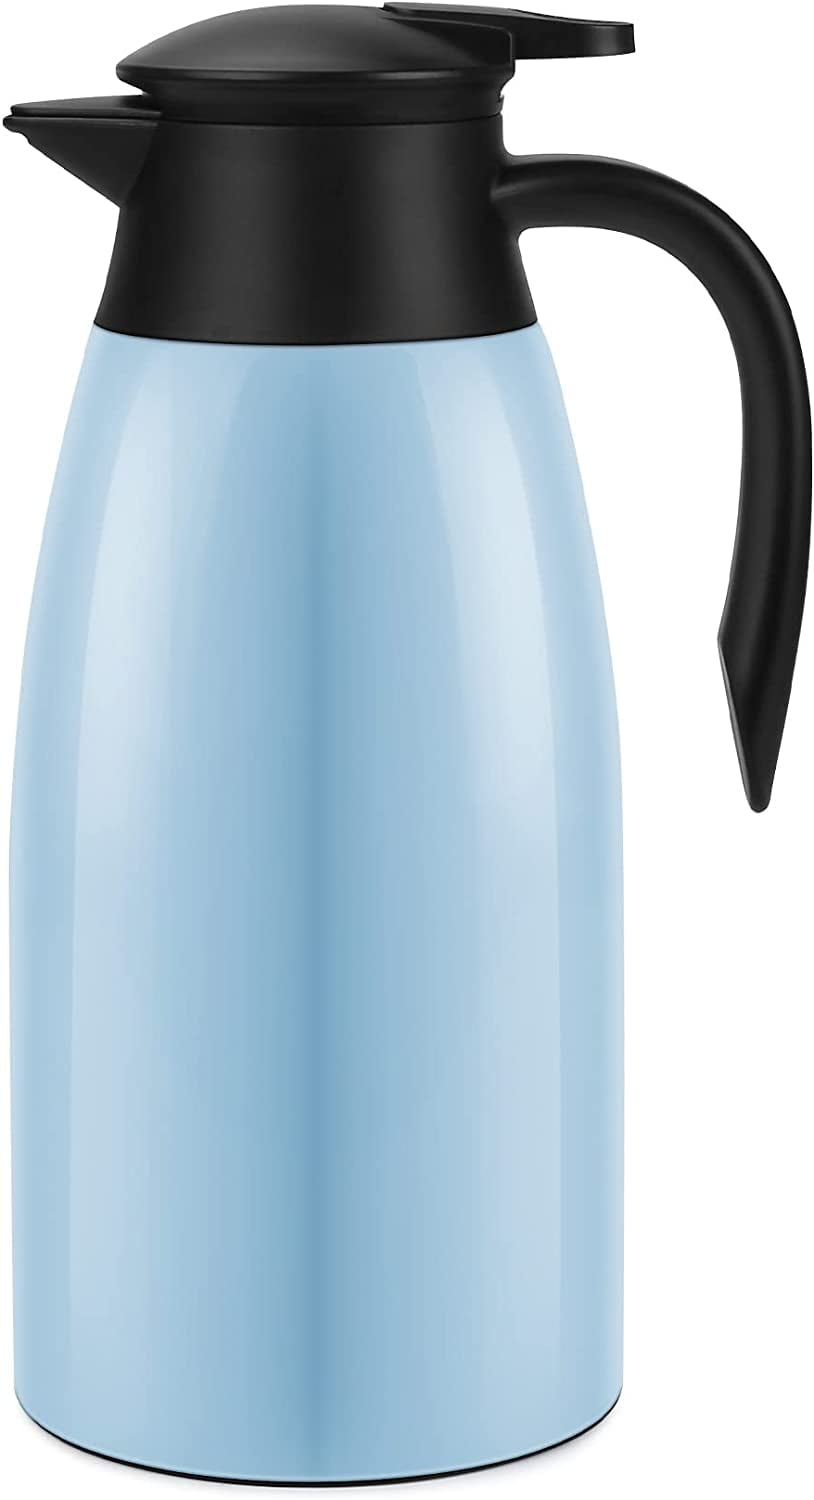 Bellemain Thermal Coffee Carafe, Stainless Steel, Insulated Server for Hot  and Cold Beverages - Coffee, Tea, Water, or Milk, 50 ounce/1.5 Liter -  Bellemain